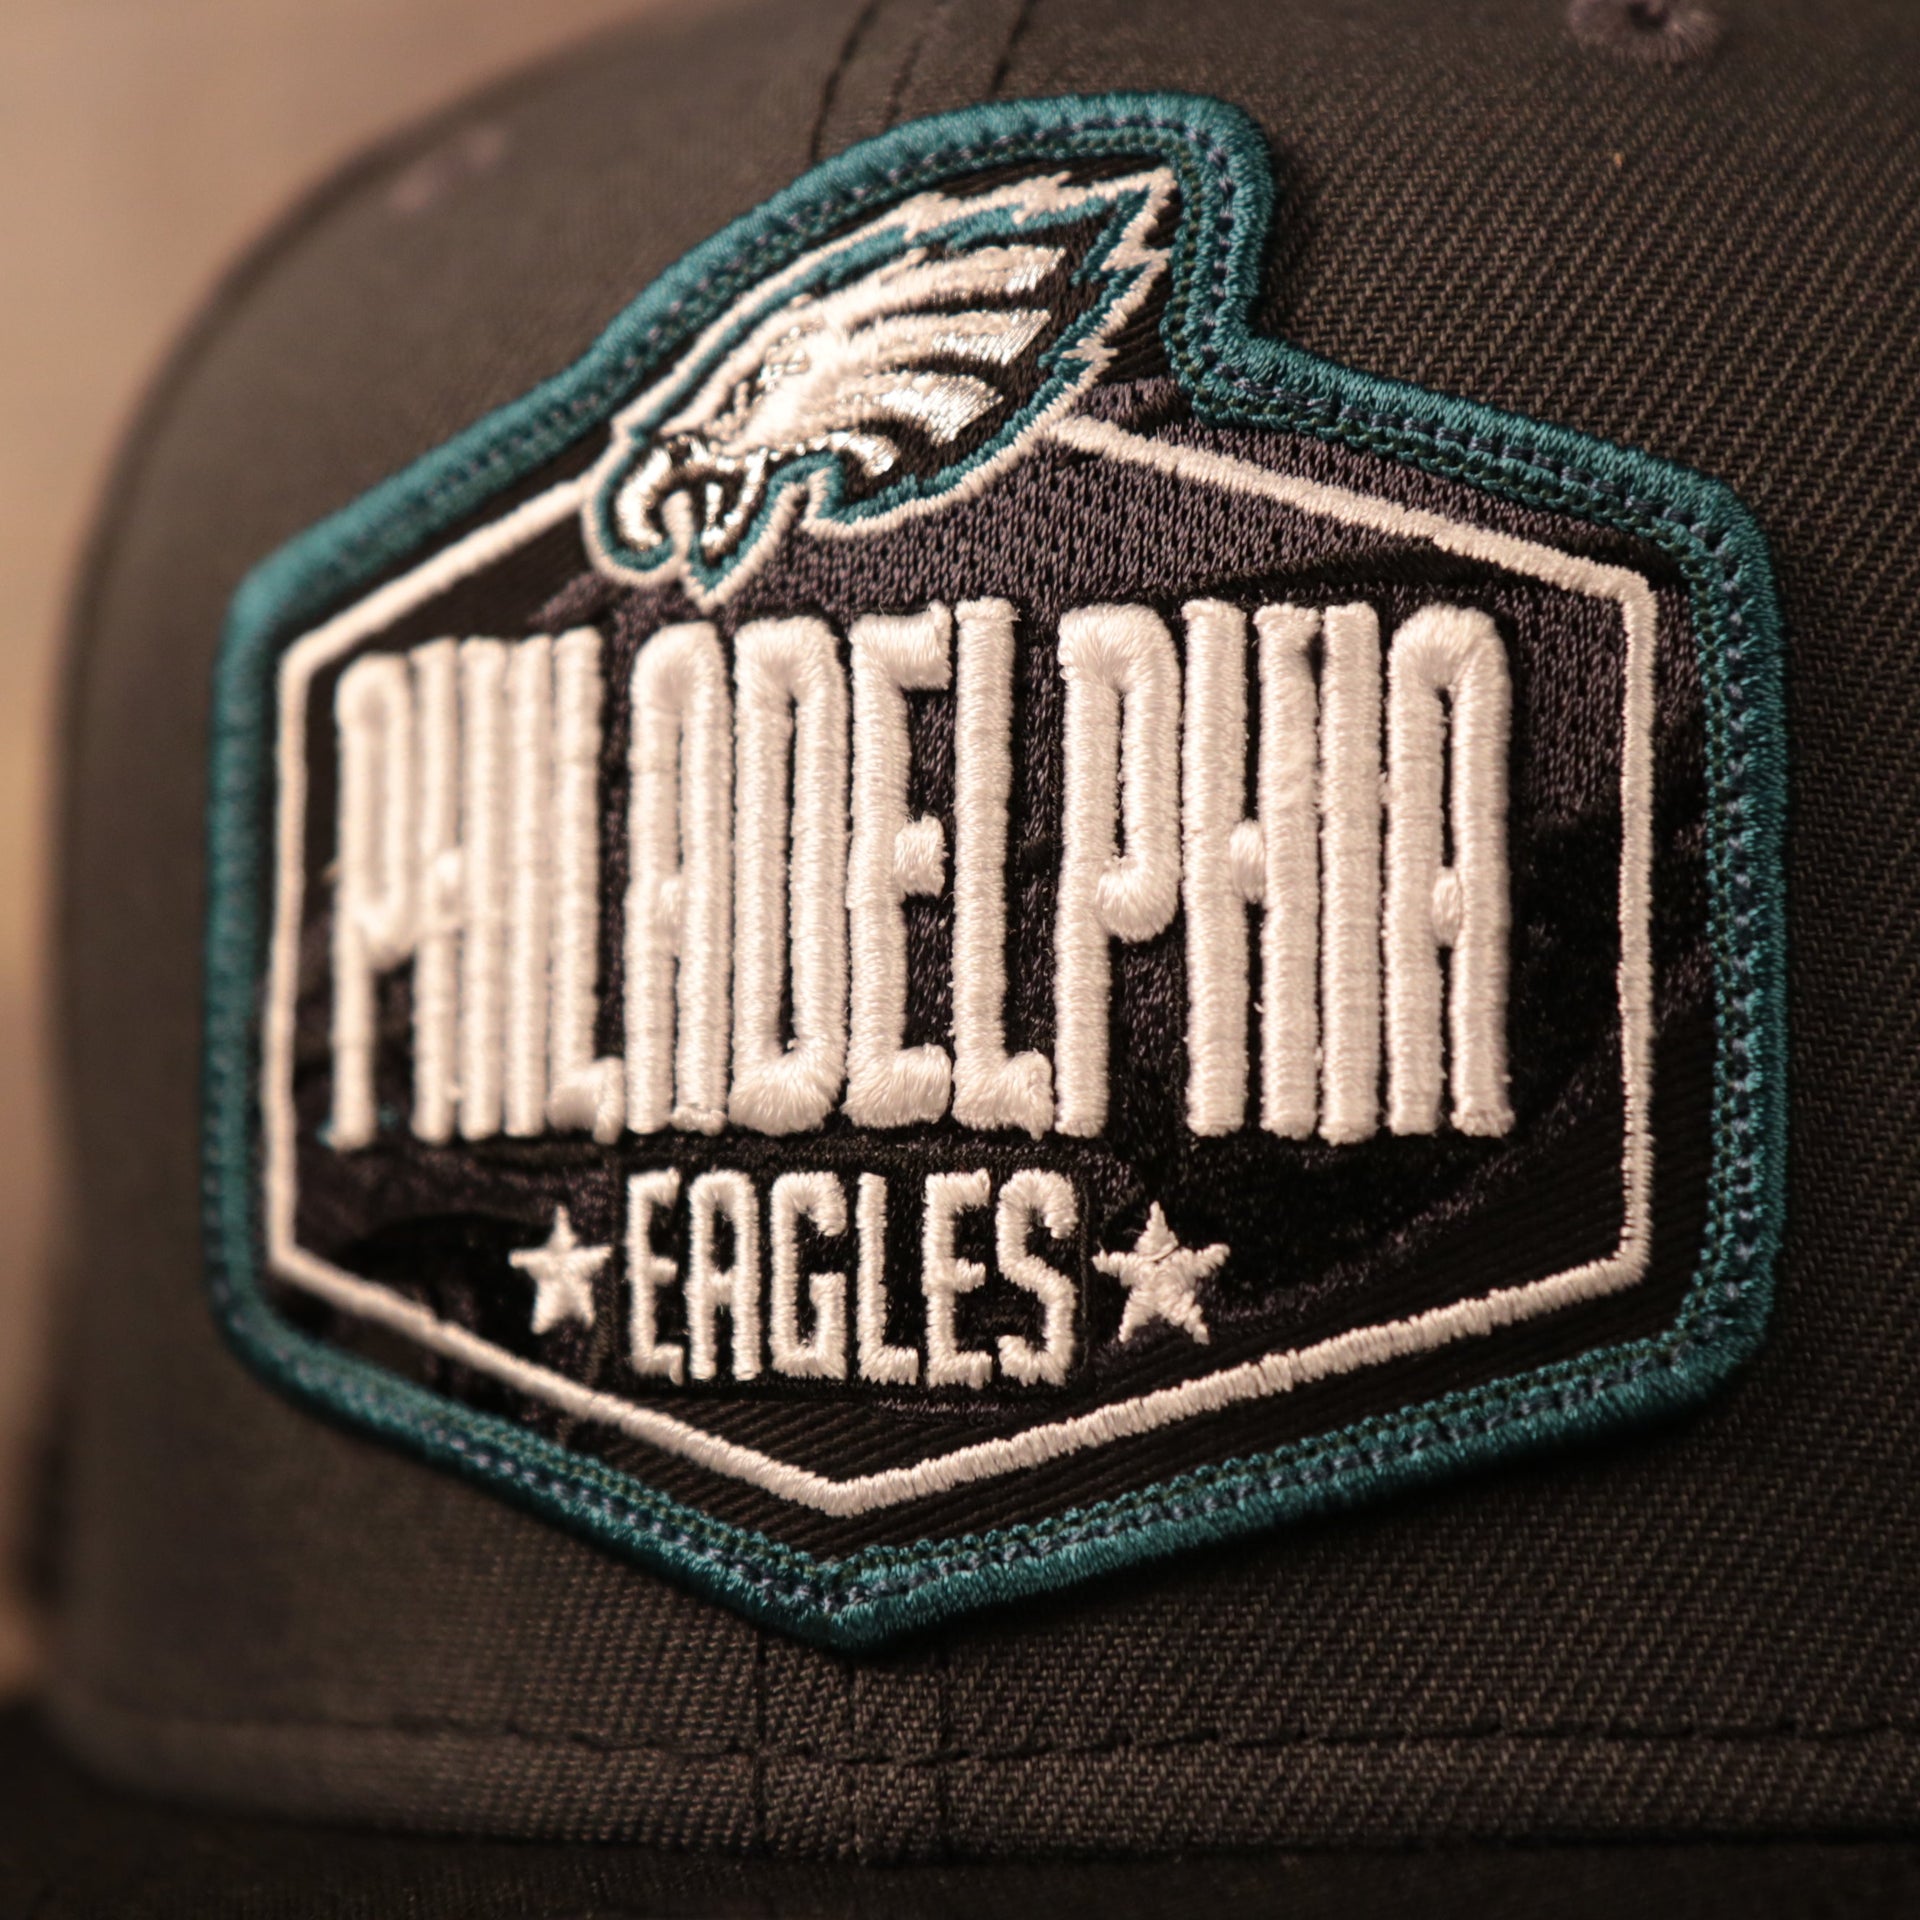 The Philadelphia Eagles logo on the front of the 2021 NFL draft cap.